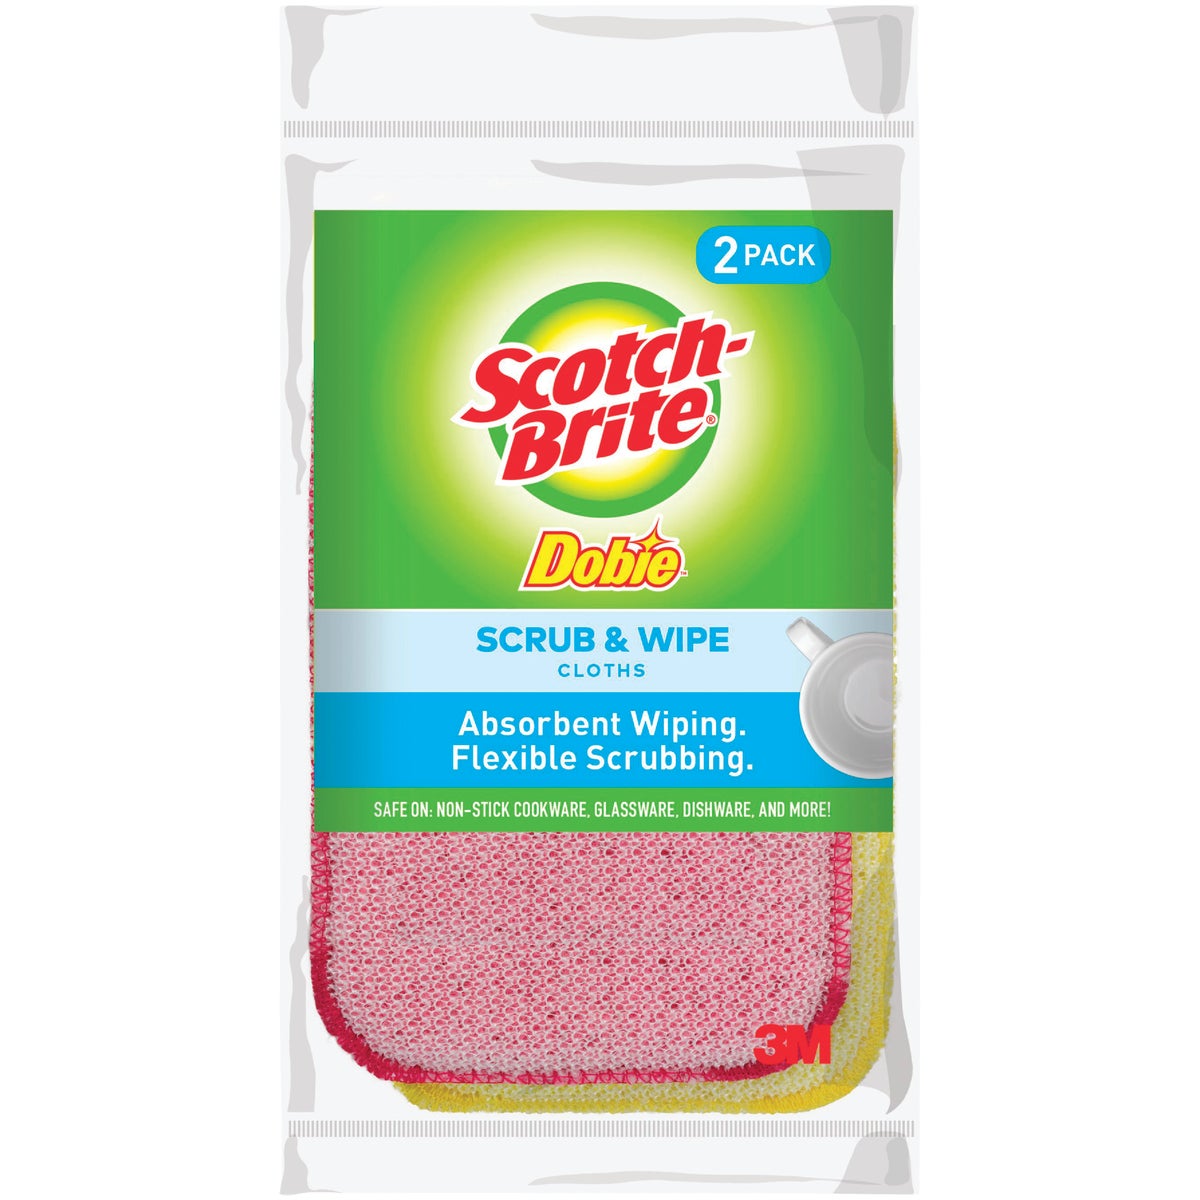 Item 602584, The Scotch Brite Dobie Scrub and Wipe Cloth is flexible and fits into tight